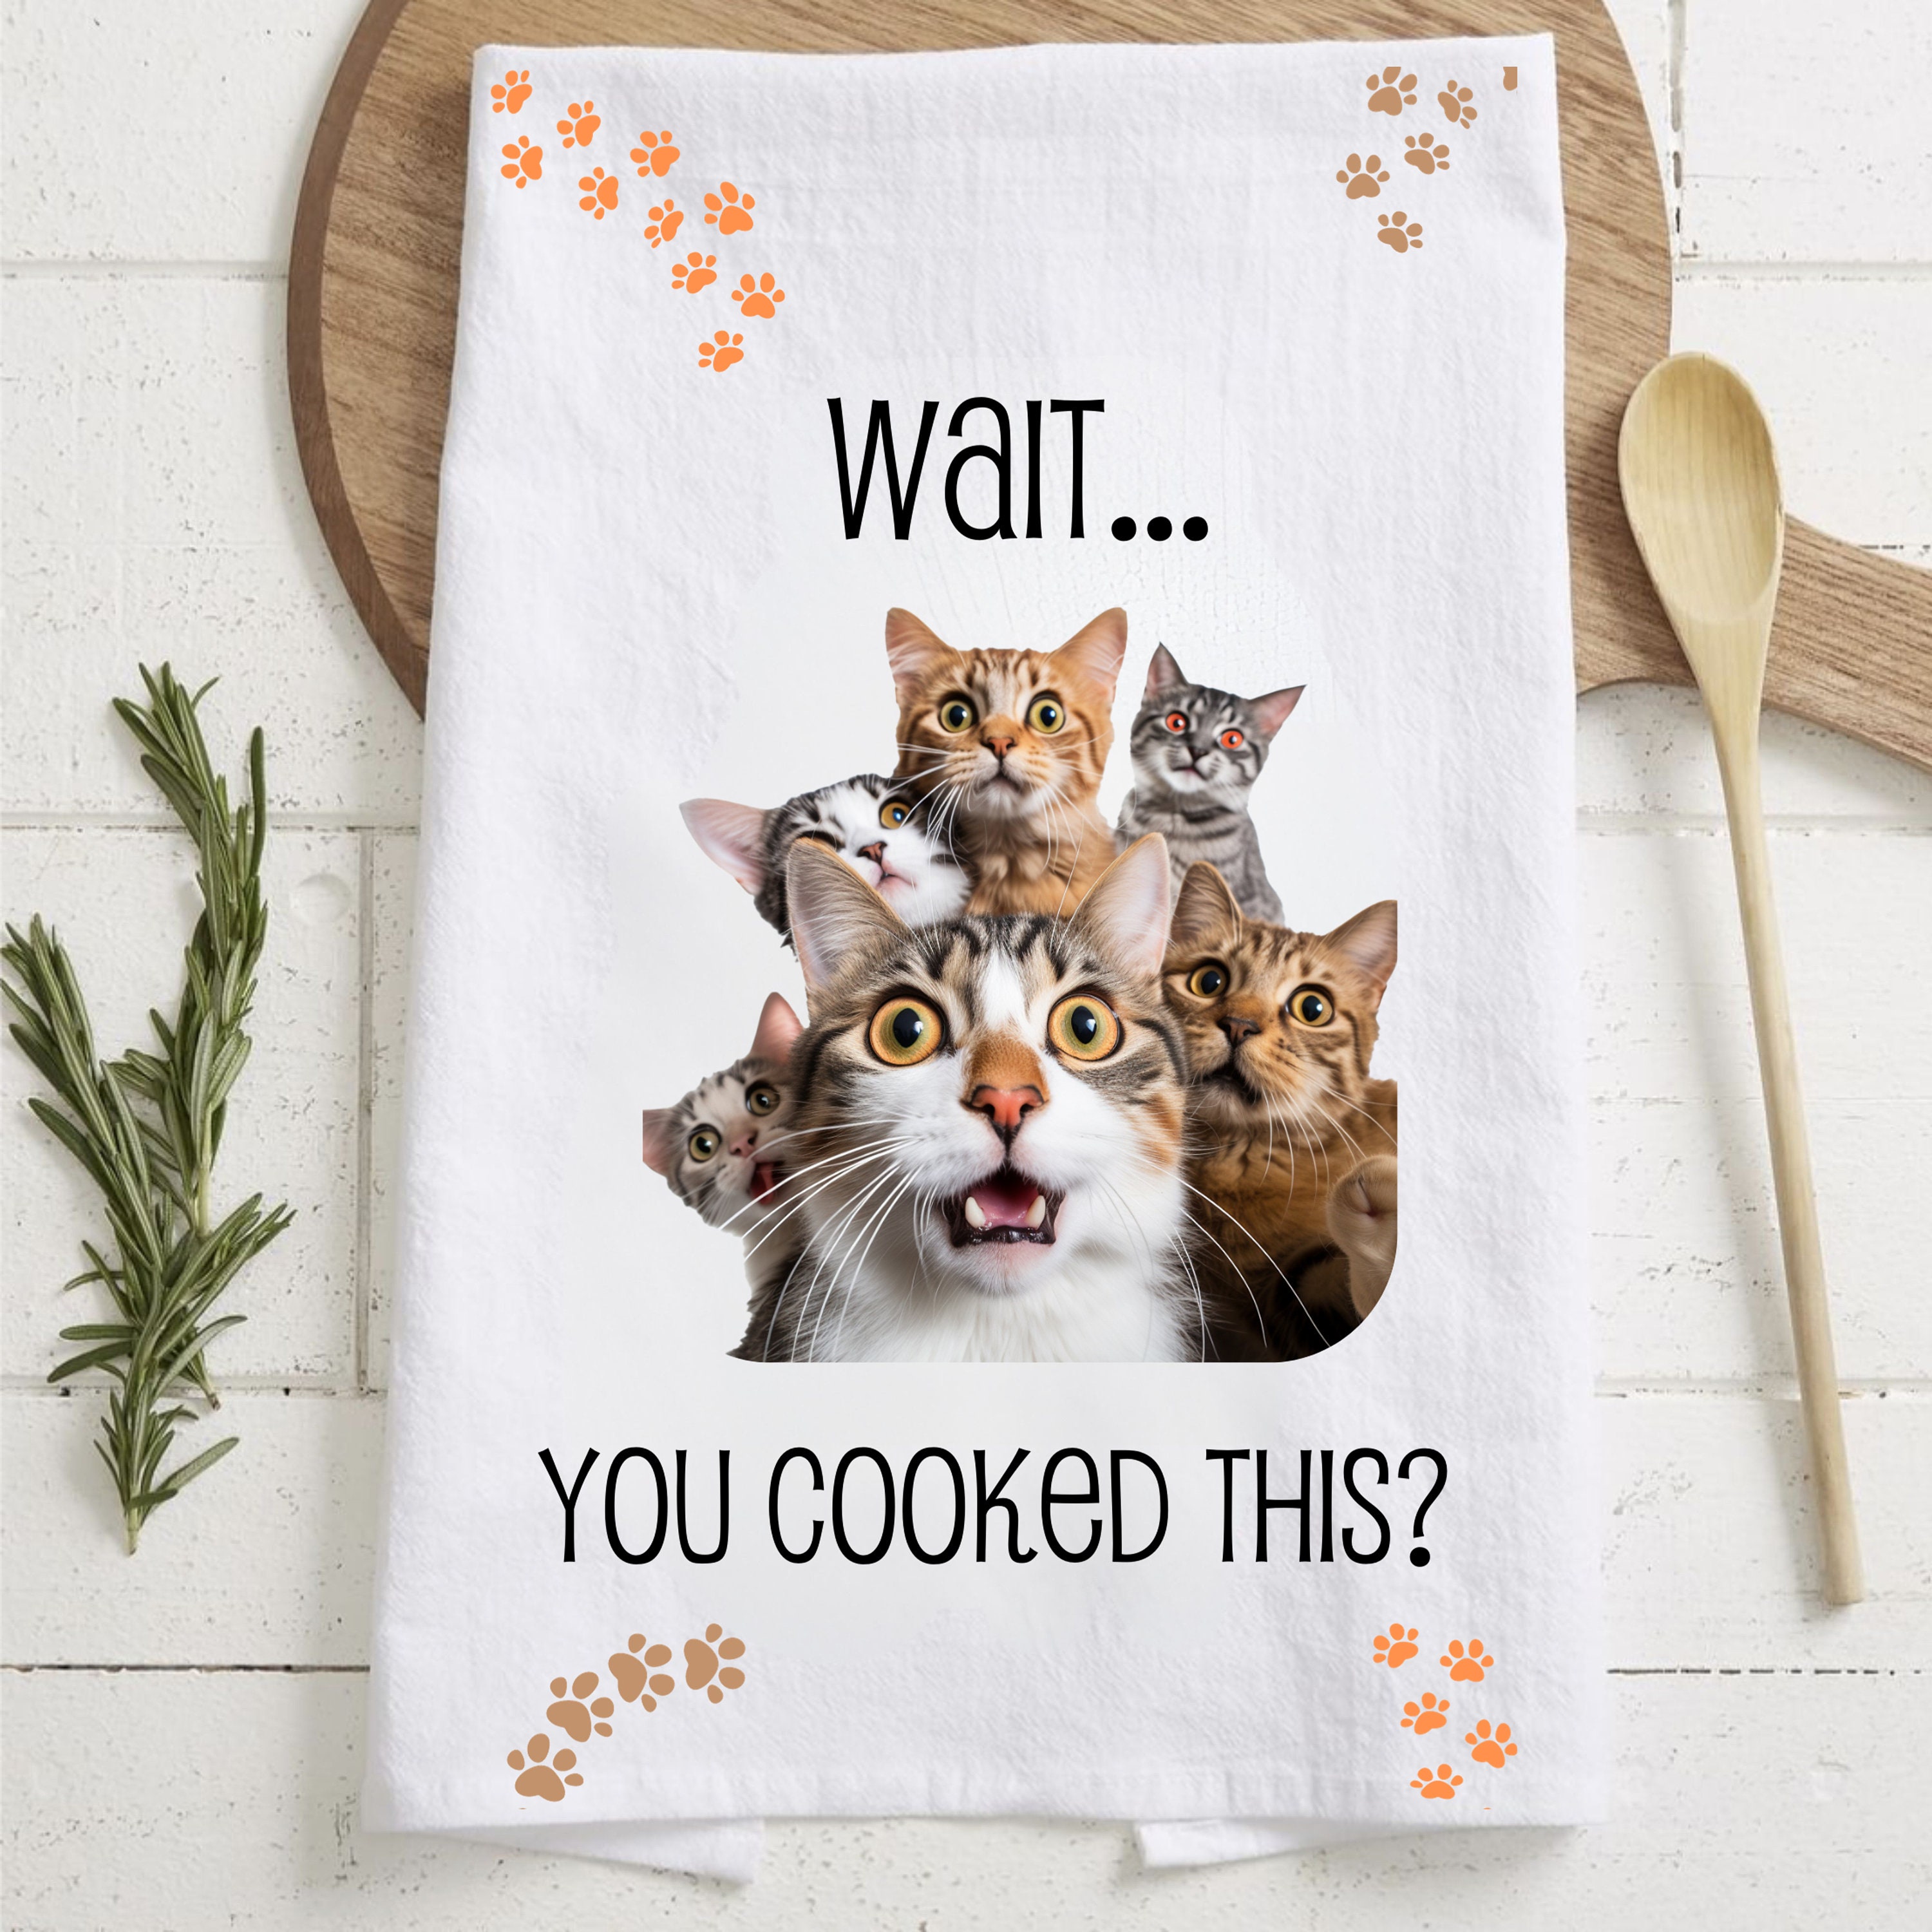 Cat Funny Hand Towels for Bathroom Kitchen - Cute Decorative Cat Decor  Hanging Washcloths Face Towels(Garfield) 